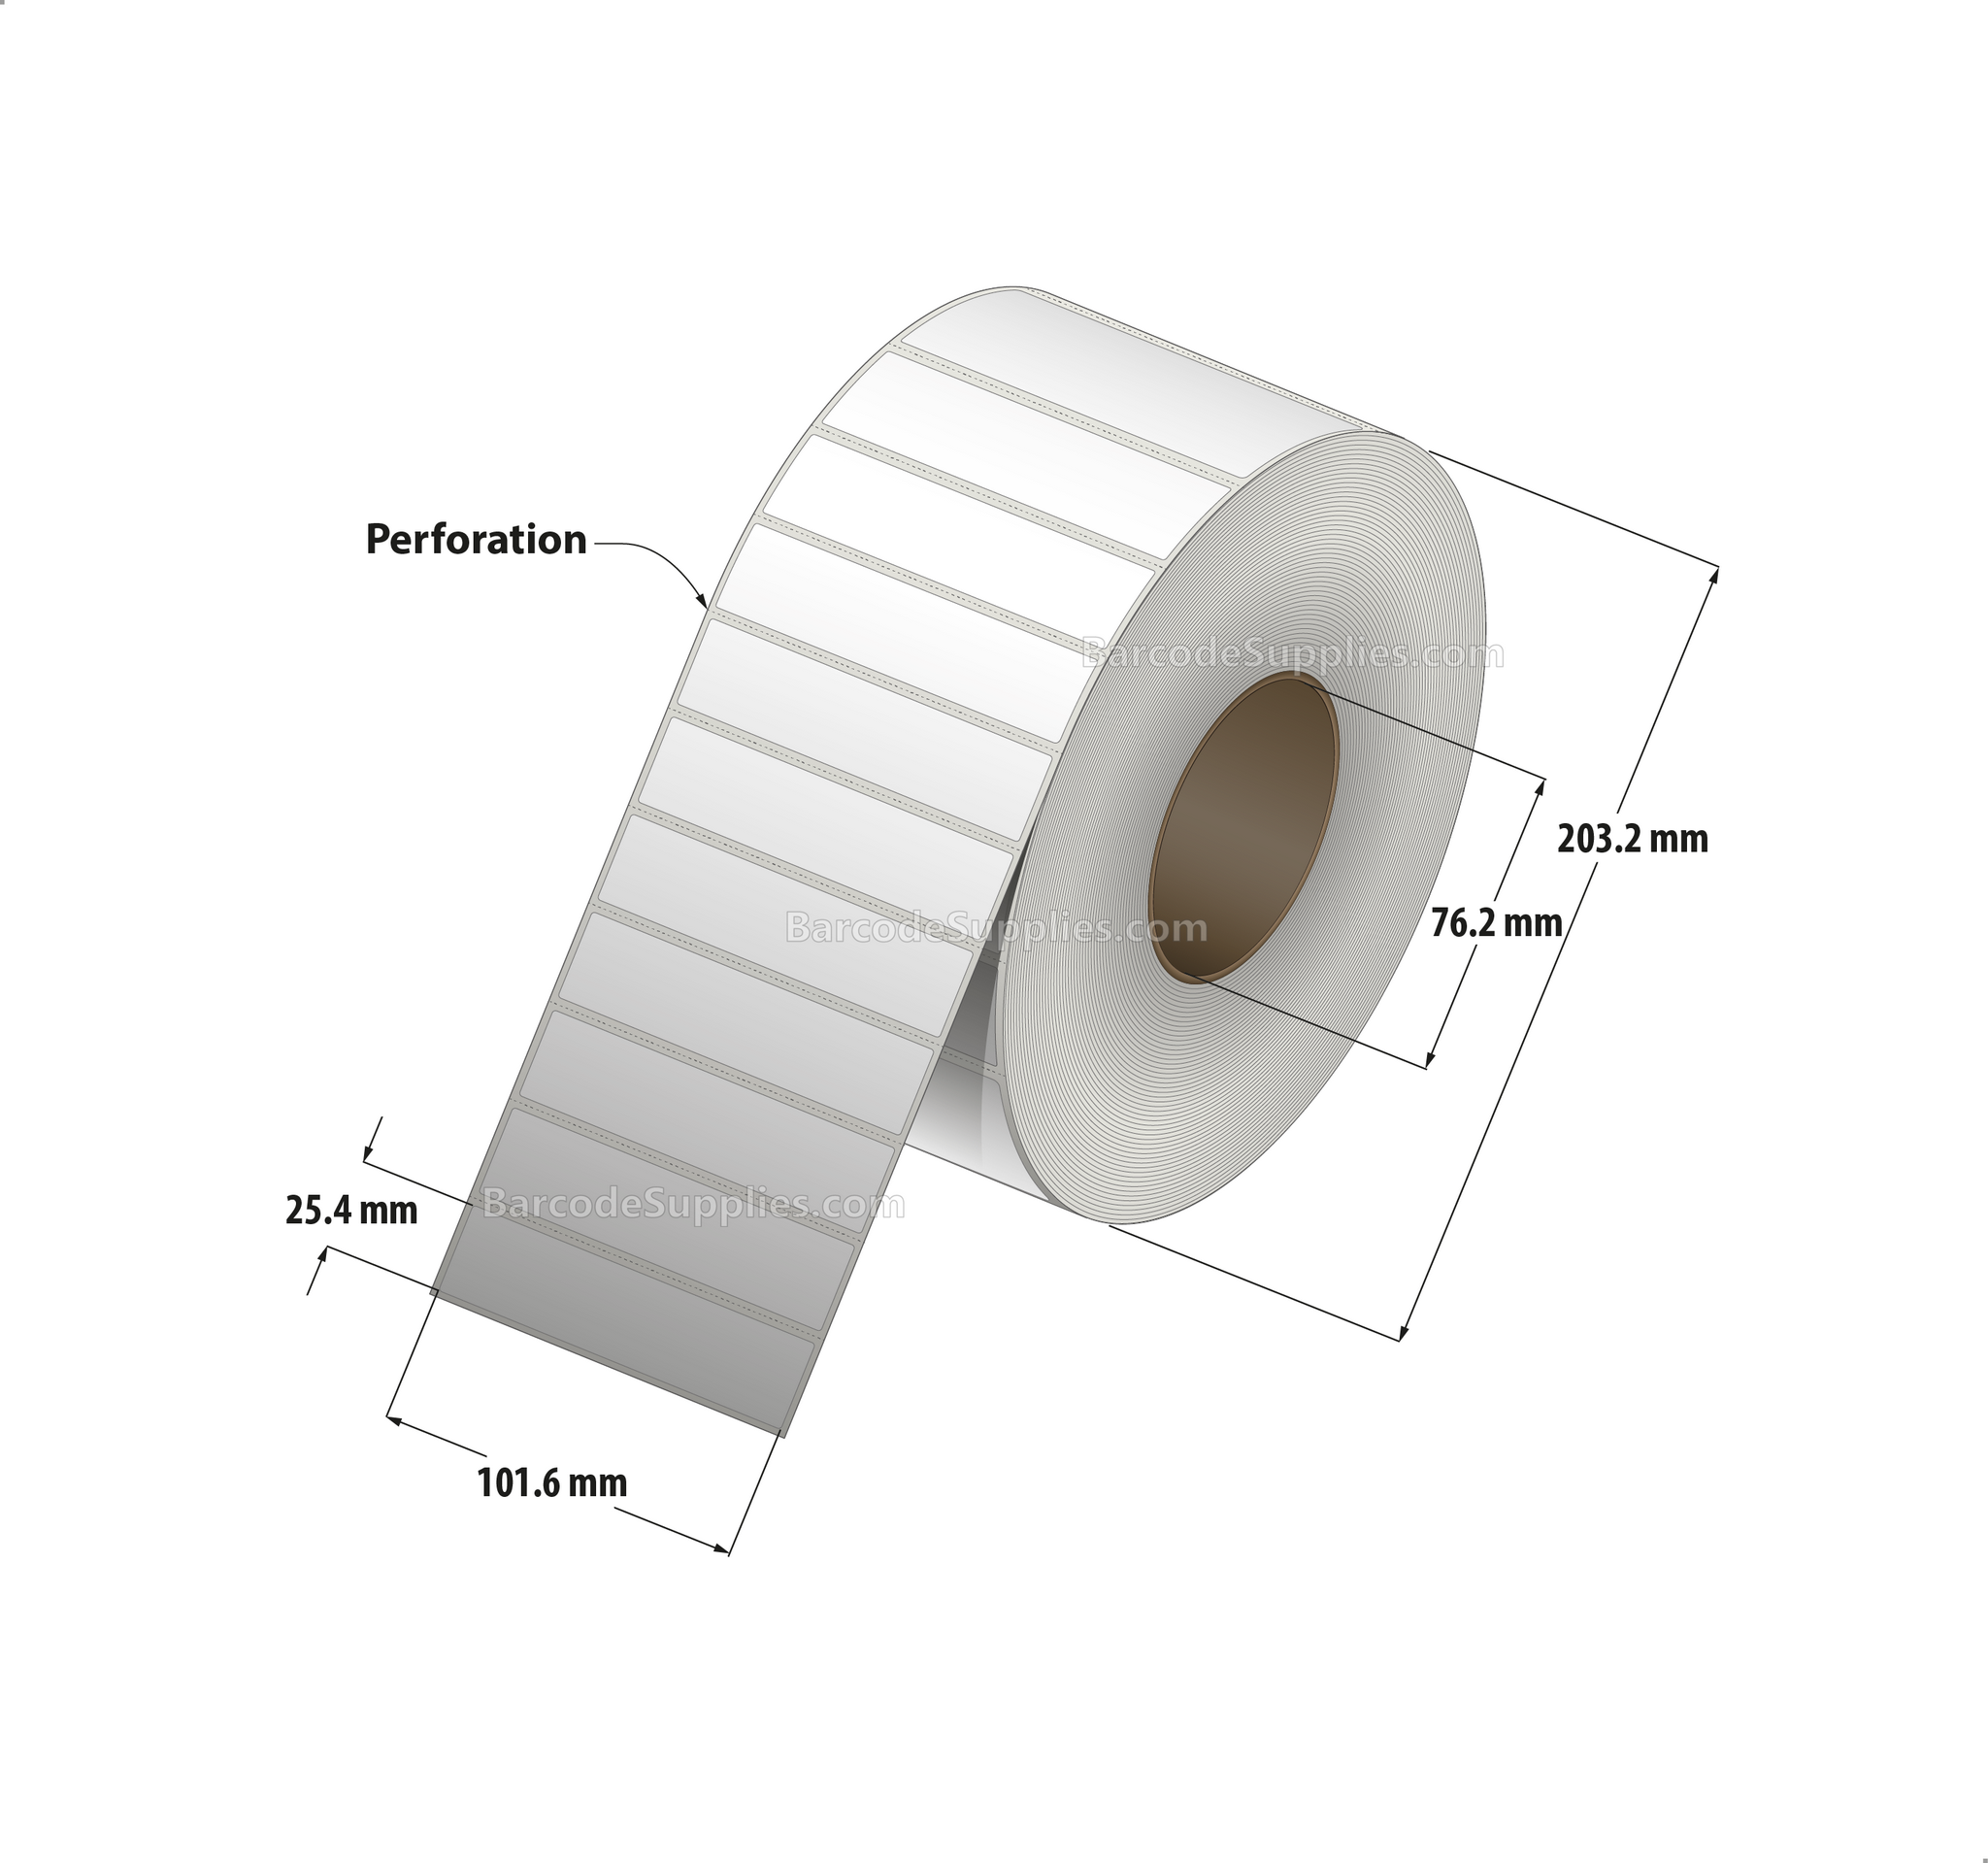 4 x 1 Thermal Transfer White Labels With Permanent Adhesive - Perforated - 5000 Labels Per Roll - Carton Of 4 Rolls - 20000 Labels Total - MPN: RP-4-1-5000-3